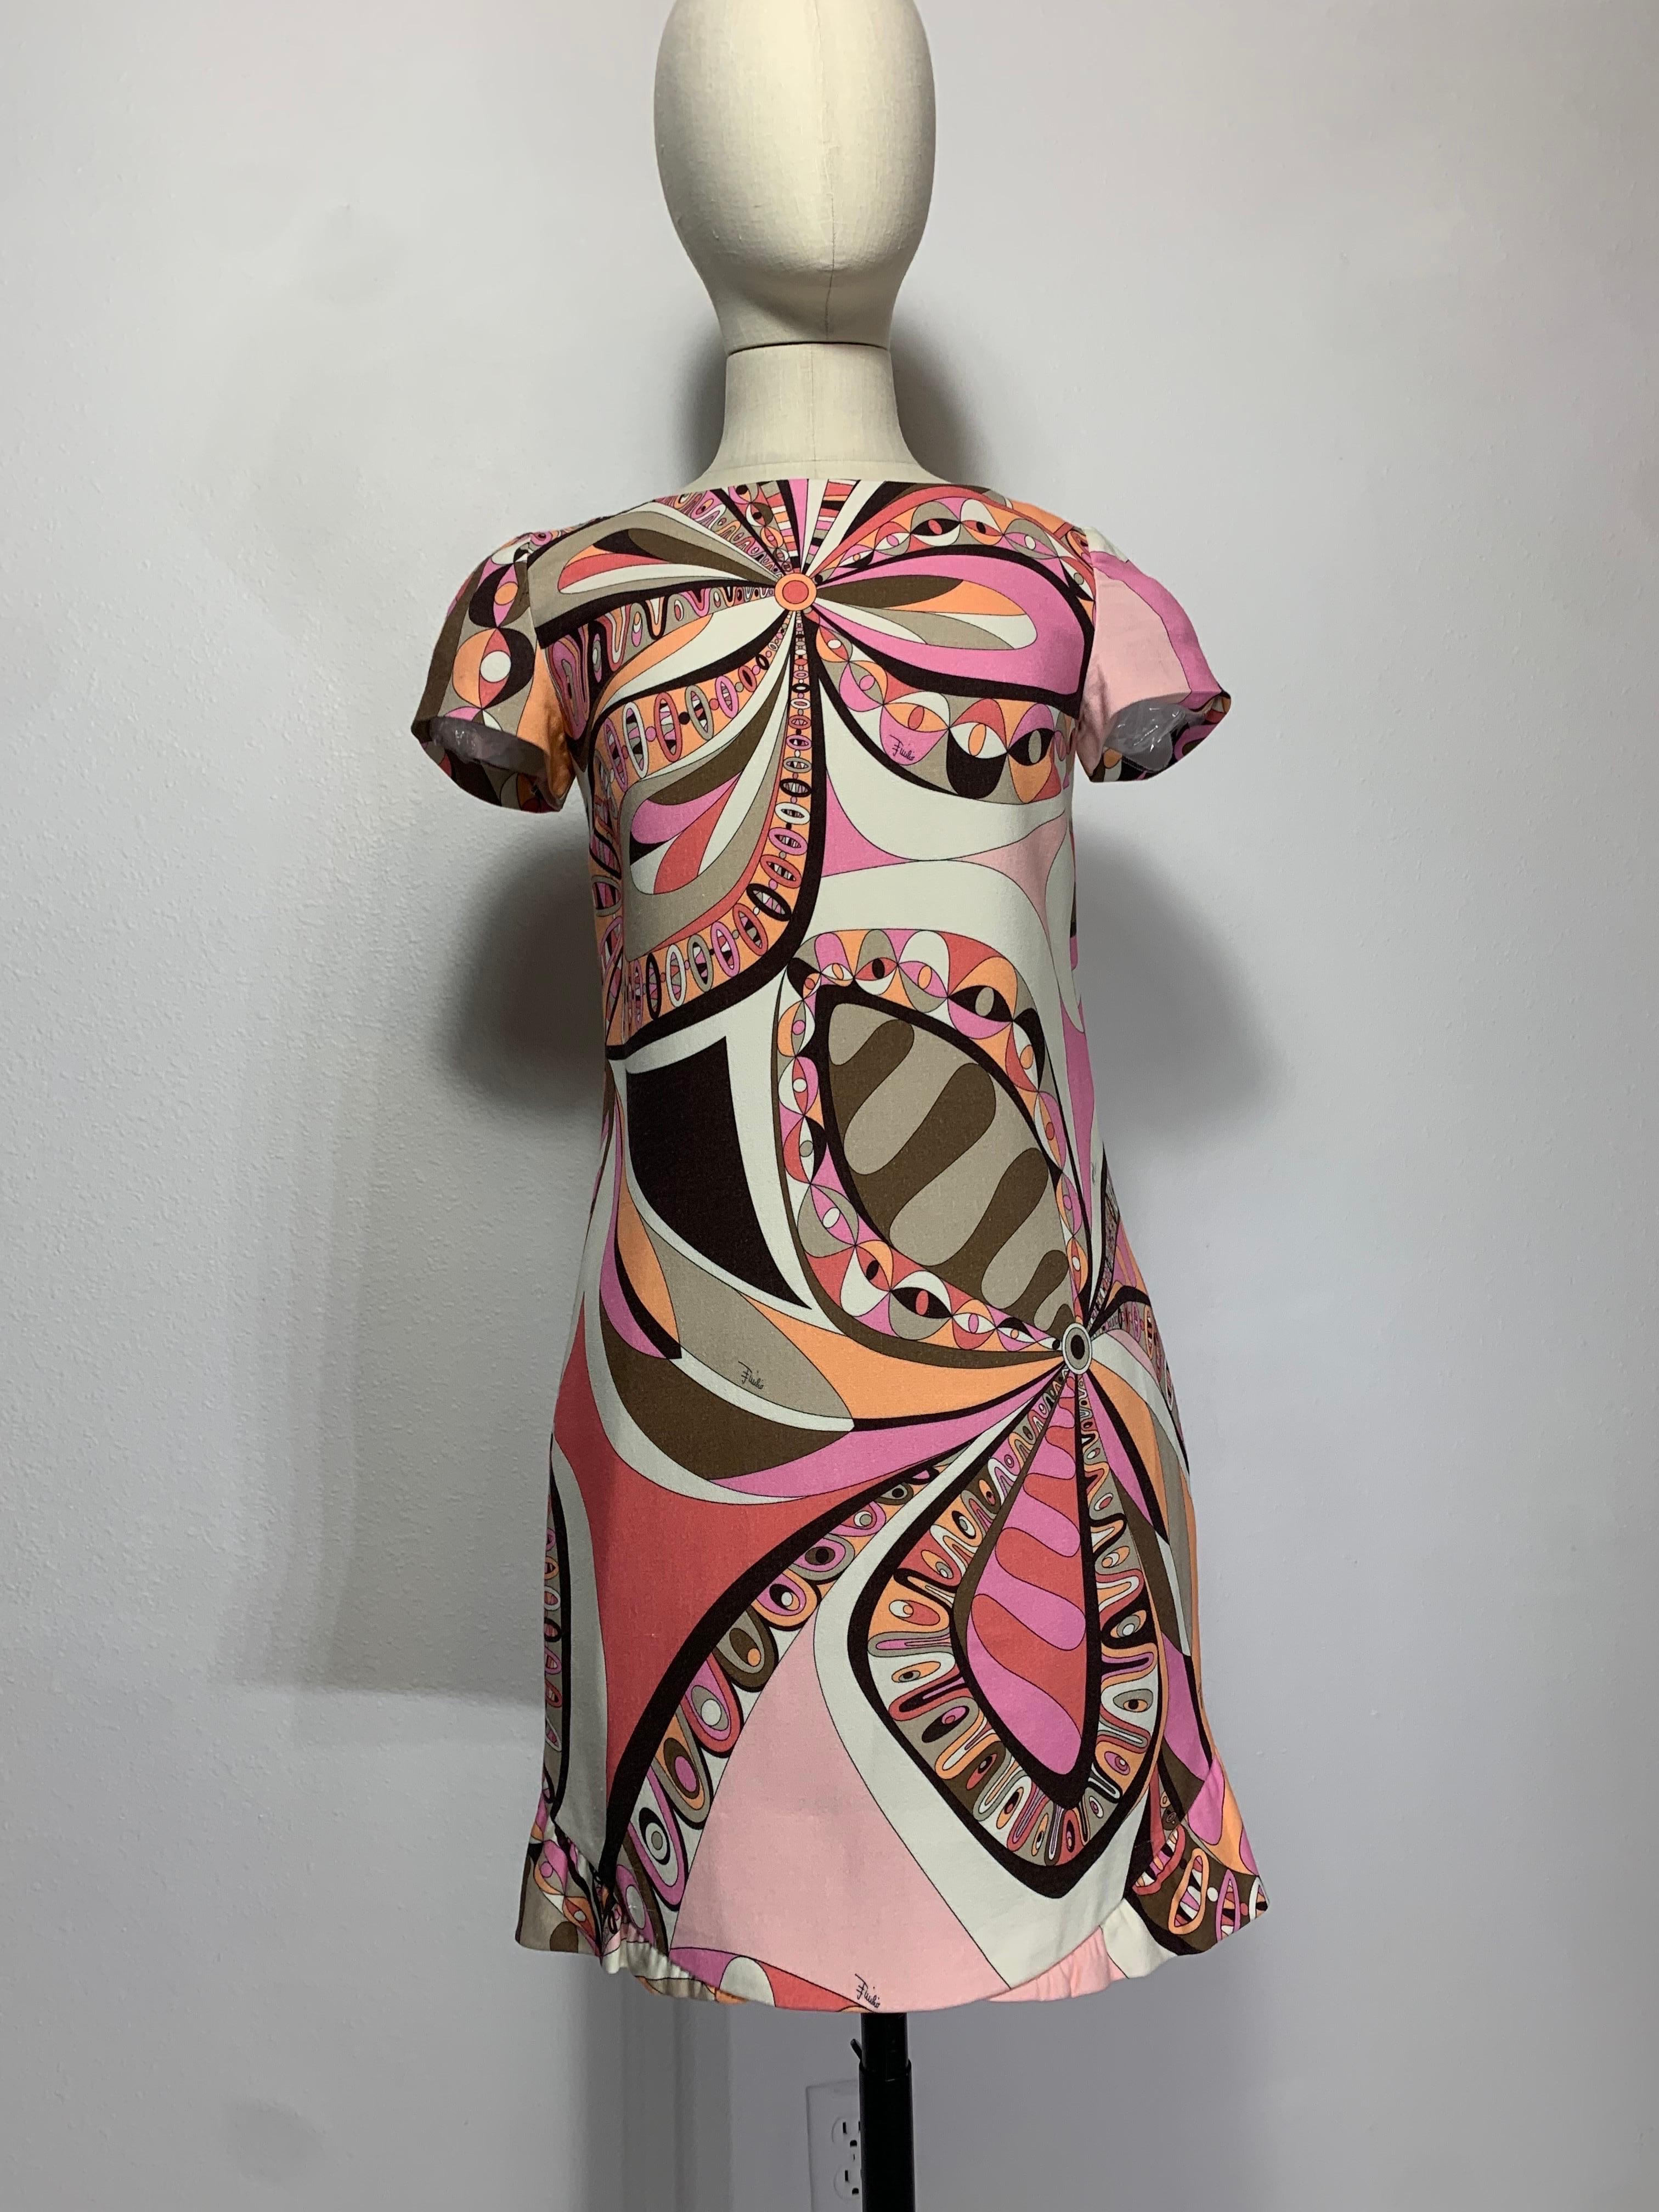 Contemporary Emilio Pucci Mod-Style Short-Sleeved Day Dress in Taupe Pink Print In Excellent Condition For Sale In Gresham, OR